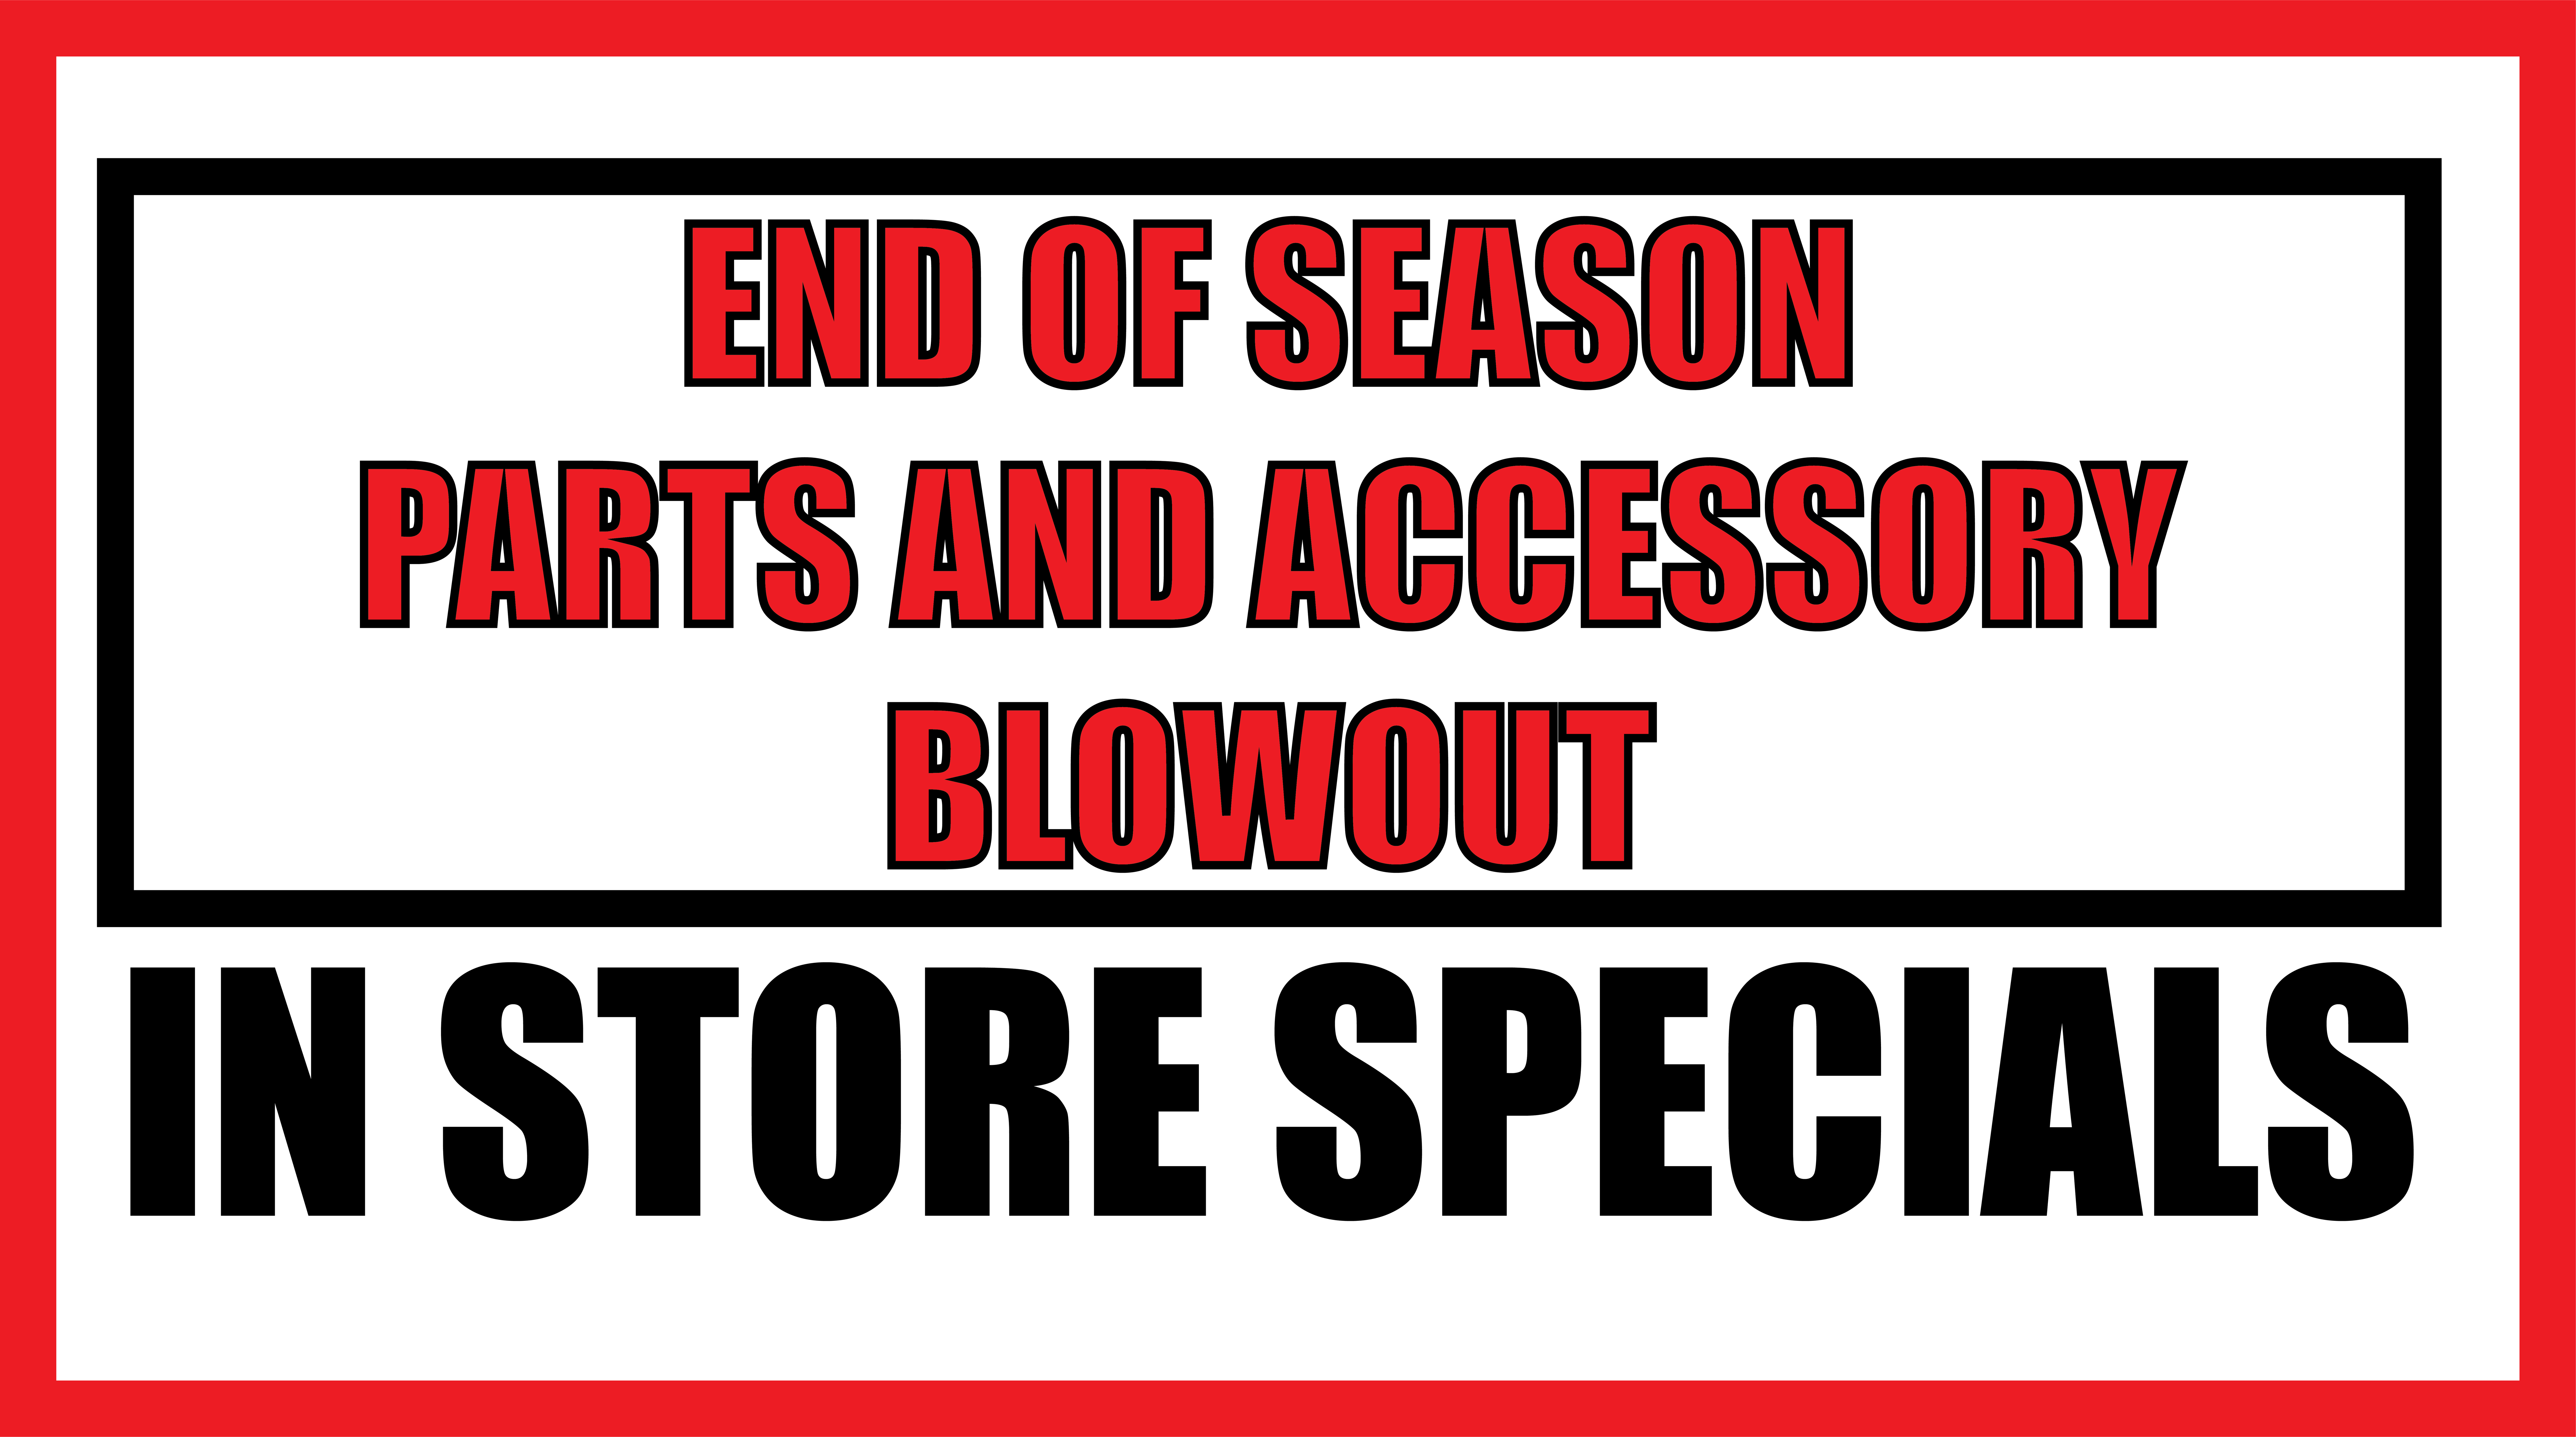 END OF SEASON PARTS AND ACCESSORY BLOWOUT AT RV CITY